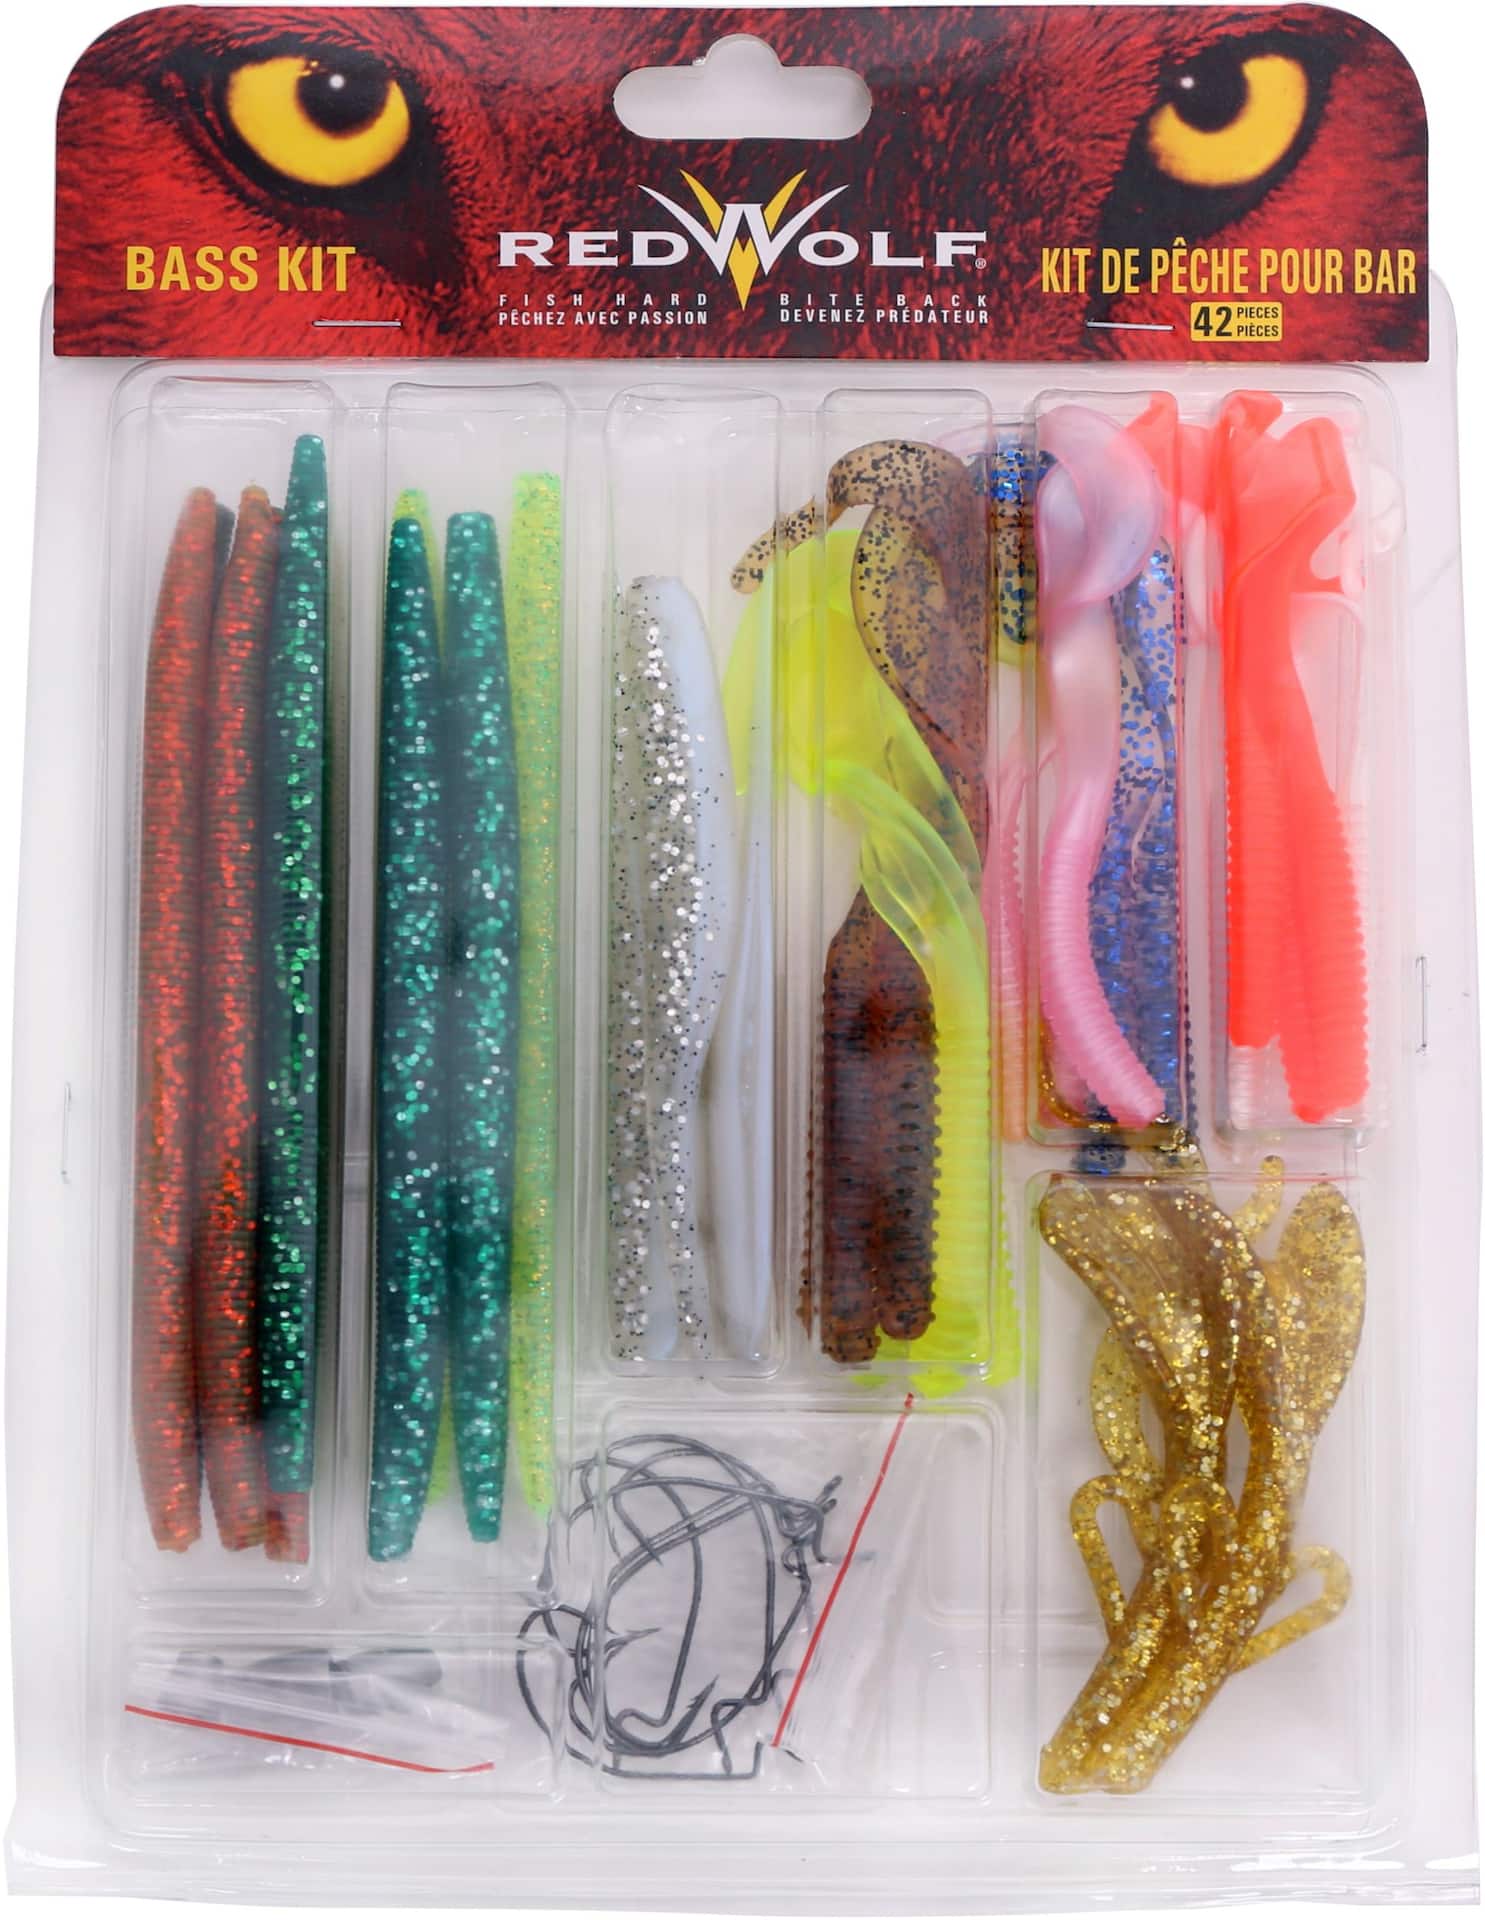 Neon Yellow Fishing Tackle Worm 2” Inch Soft Bait Lure, Lot of 5, Used  Condition